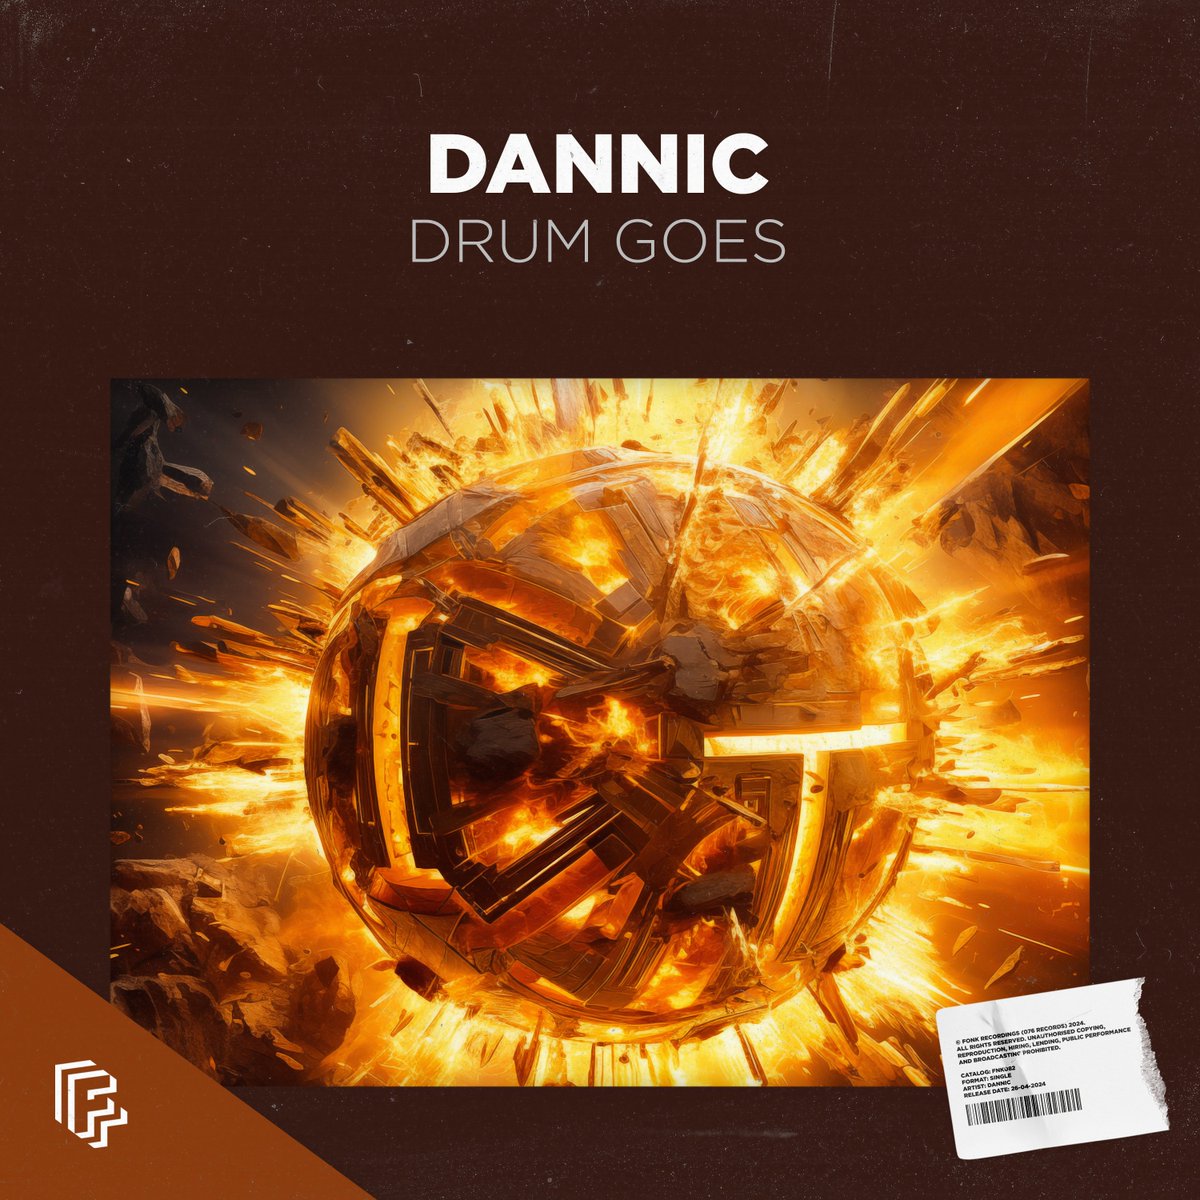 New music wednesday! 😅 Just dropped this new club tune! Hope you dig it! linktr.ee/djdannic